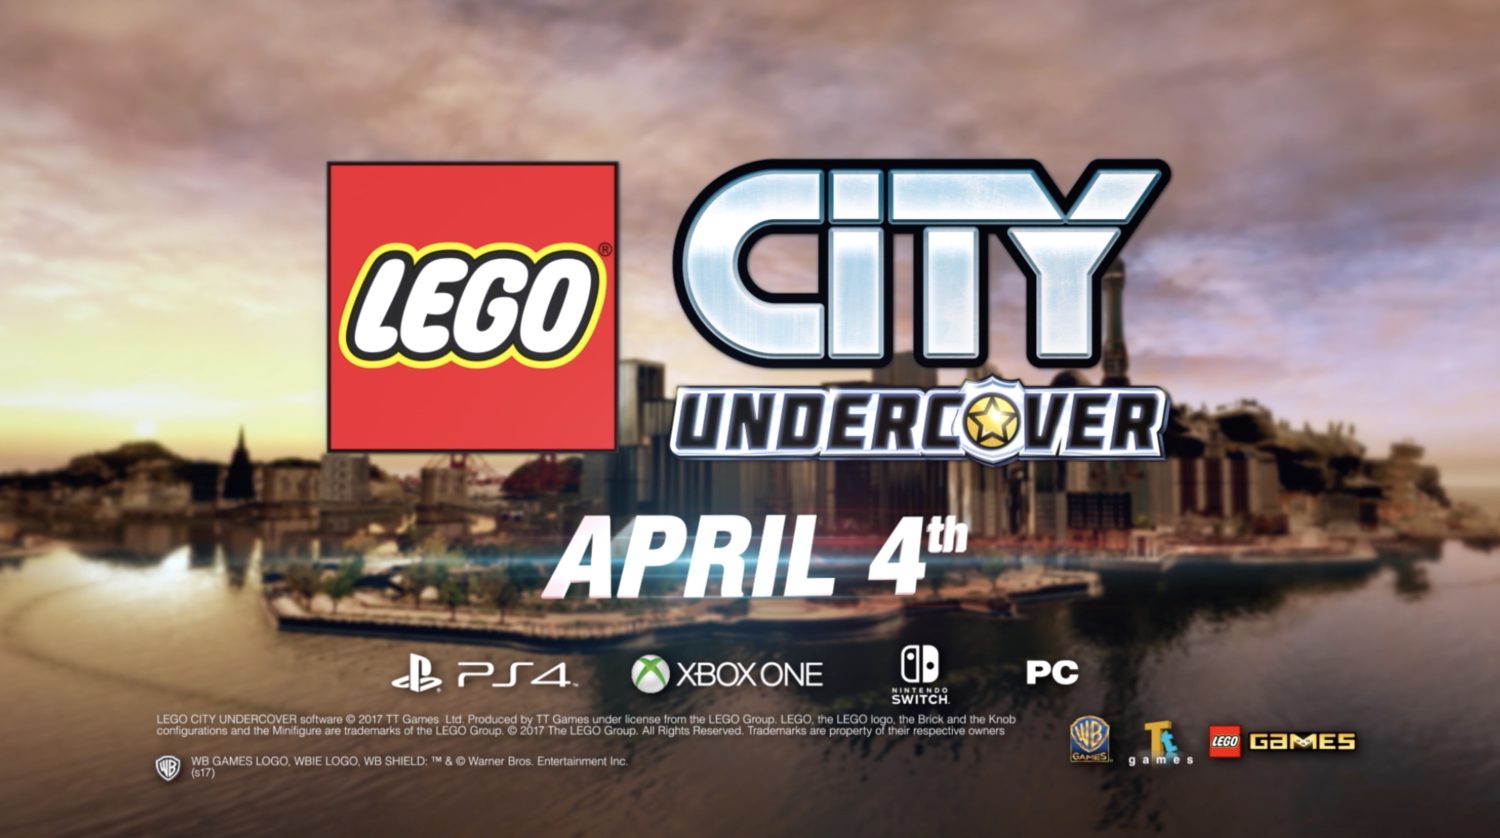 Lego City Undercover Co-op (Nintendo Switch) 